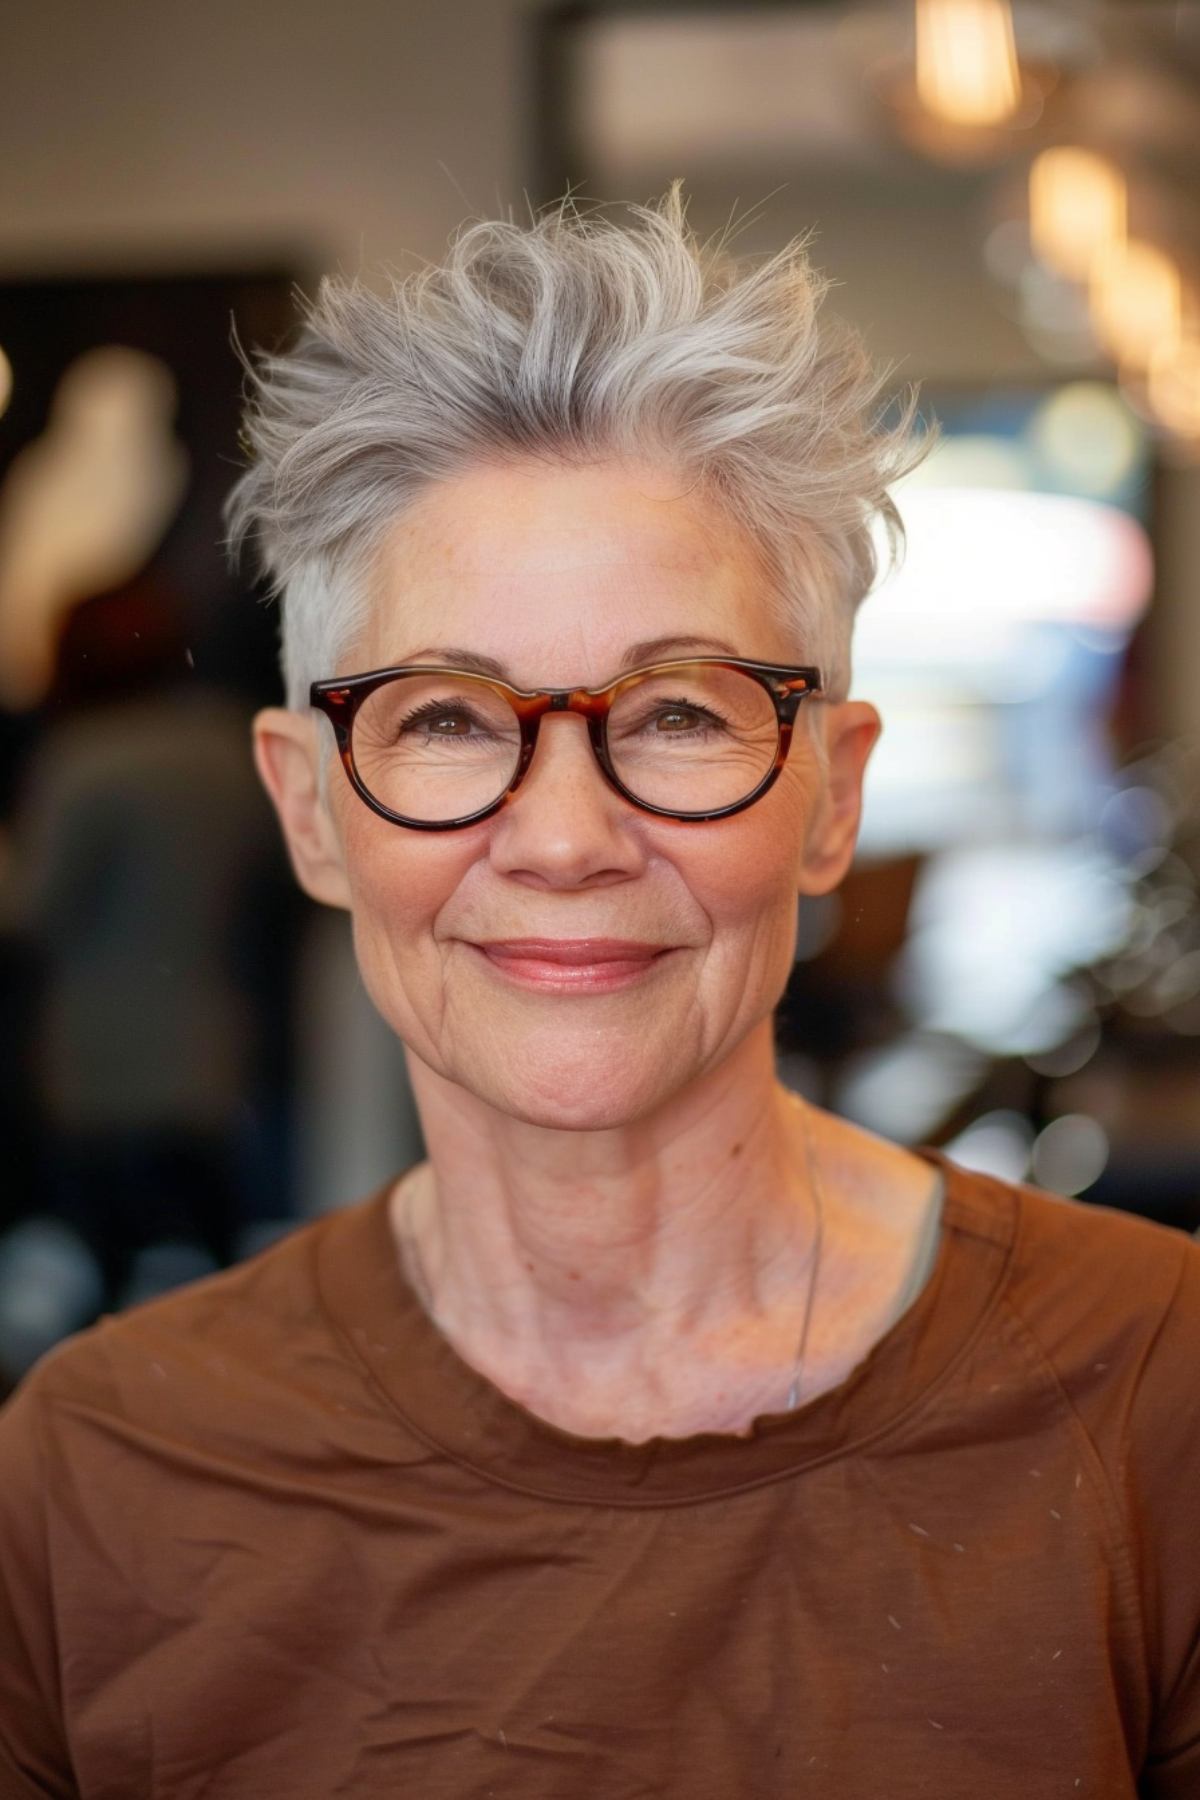 Textured pixie cut for grey hair with glasses.